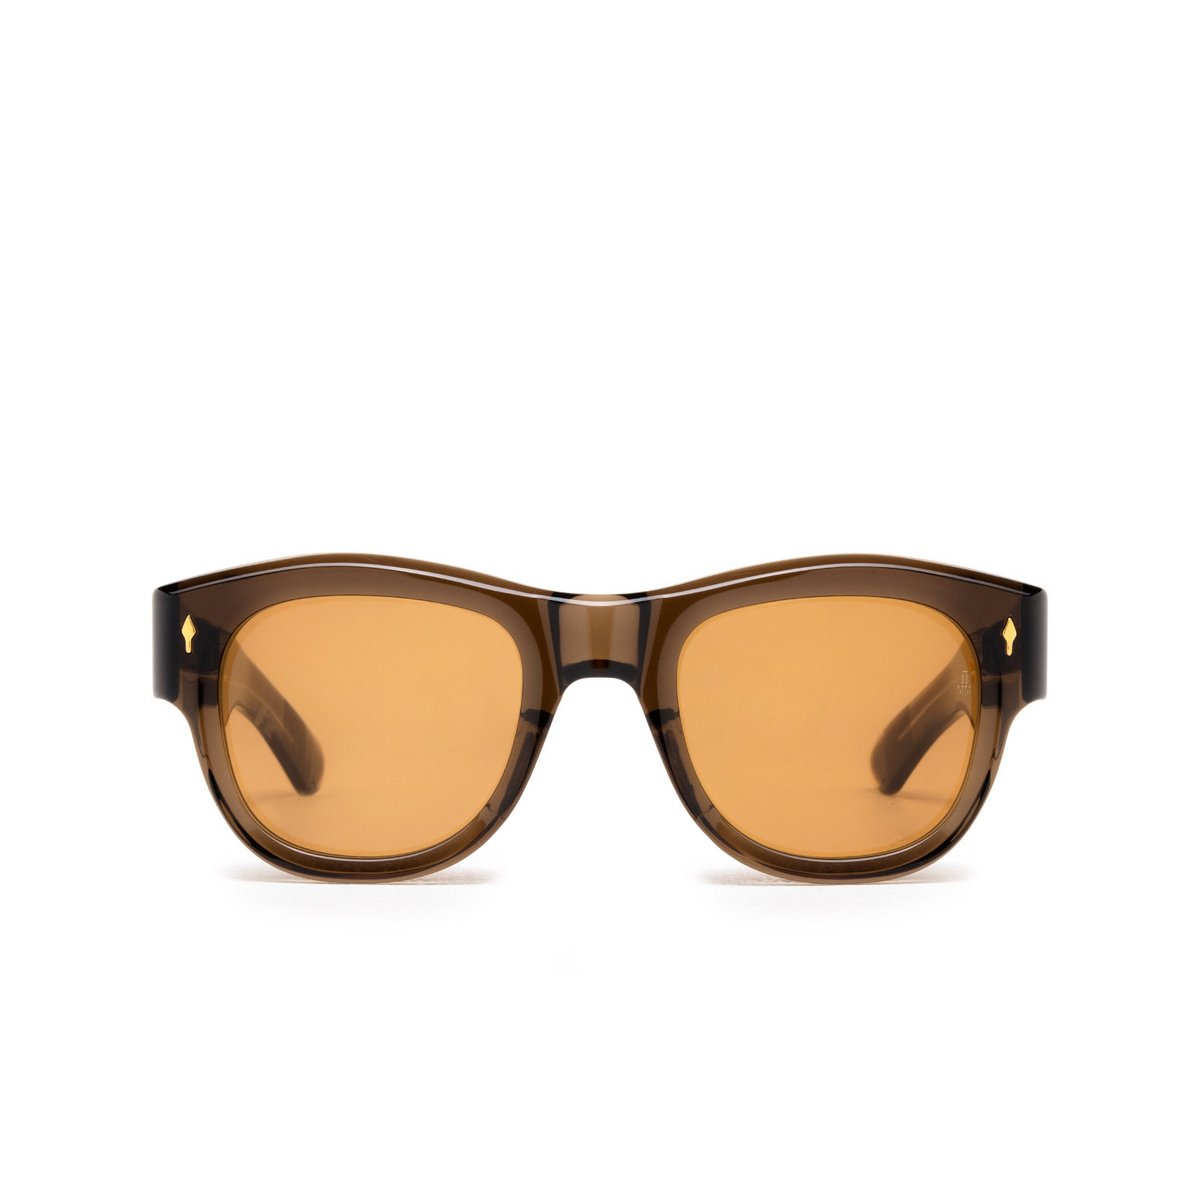 Jacques Marie Mage CAAN Sunglasses LONDON - front view